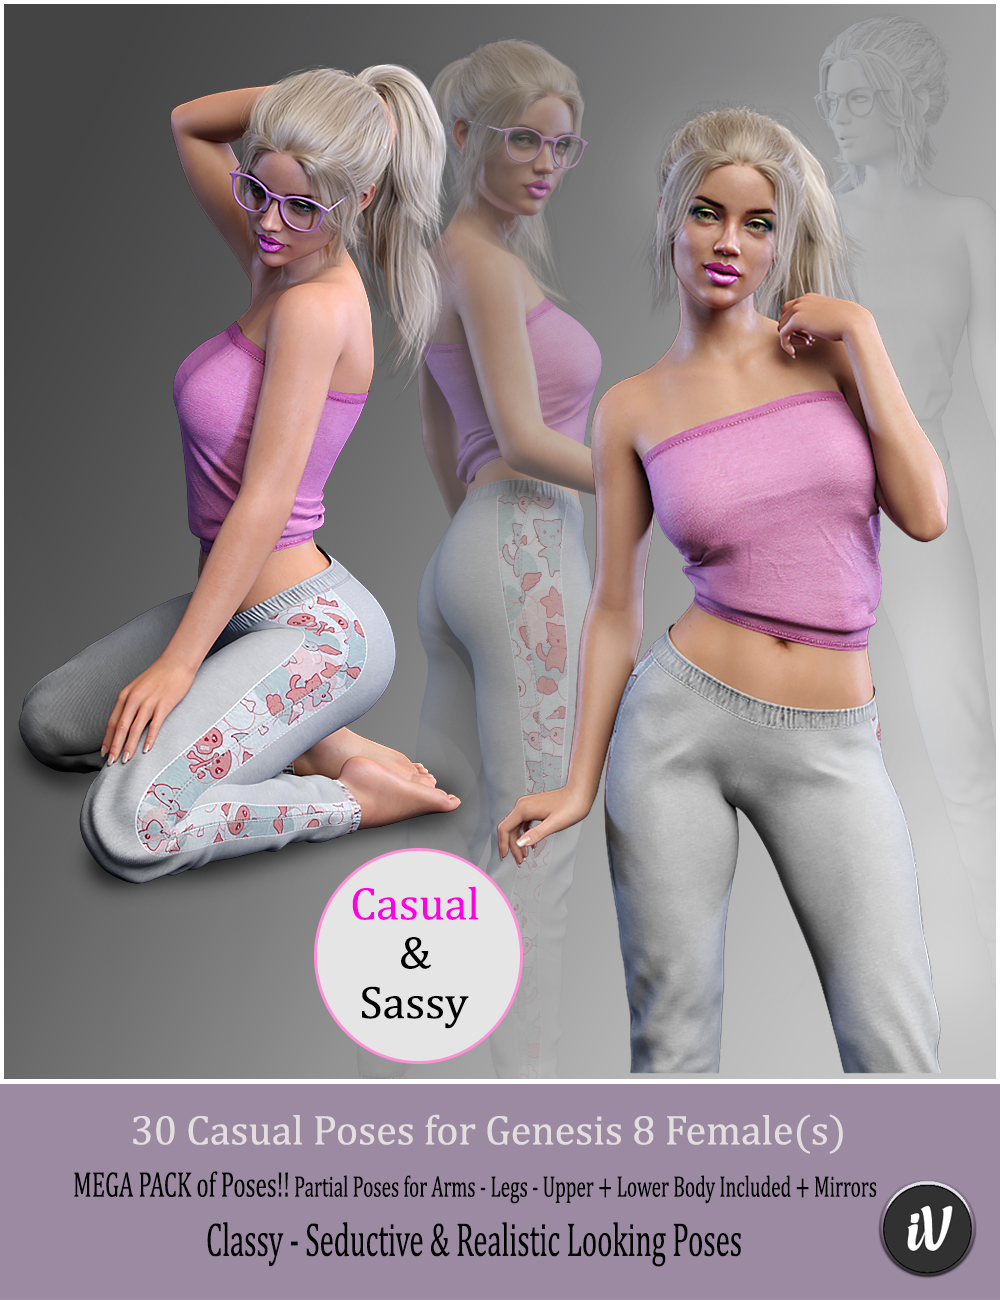 Female poses #1 - The Sims 4 Mods - CurseForge